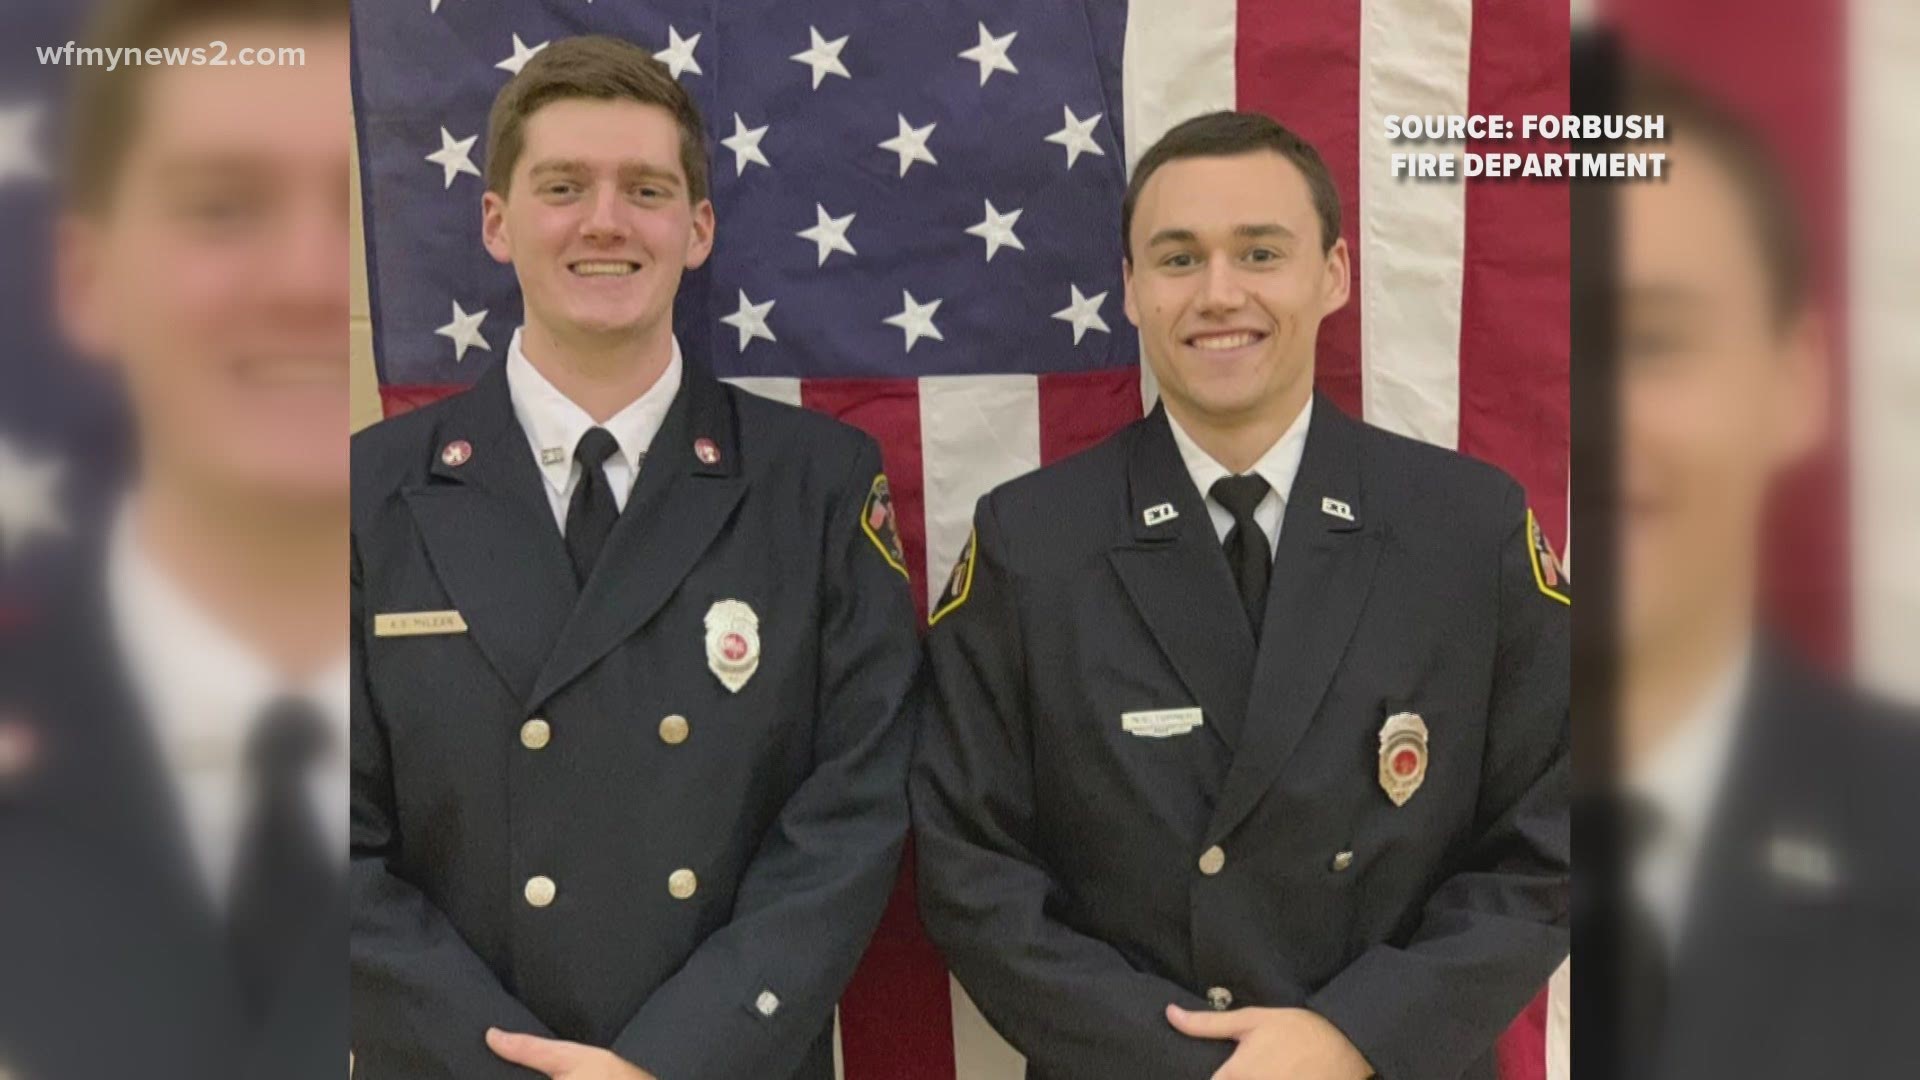 Andrew McLean and Nathan Turner worked at the Forbush Fire Department while getting their degrees at UNC Charlotte.